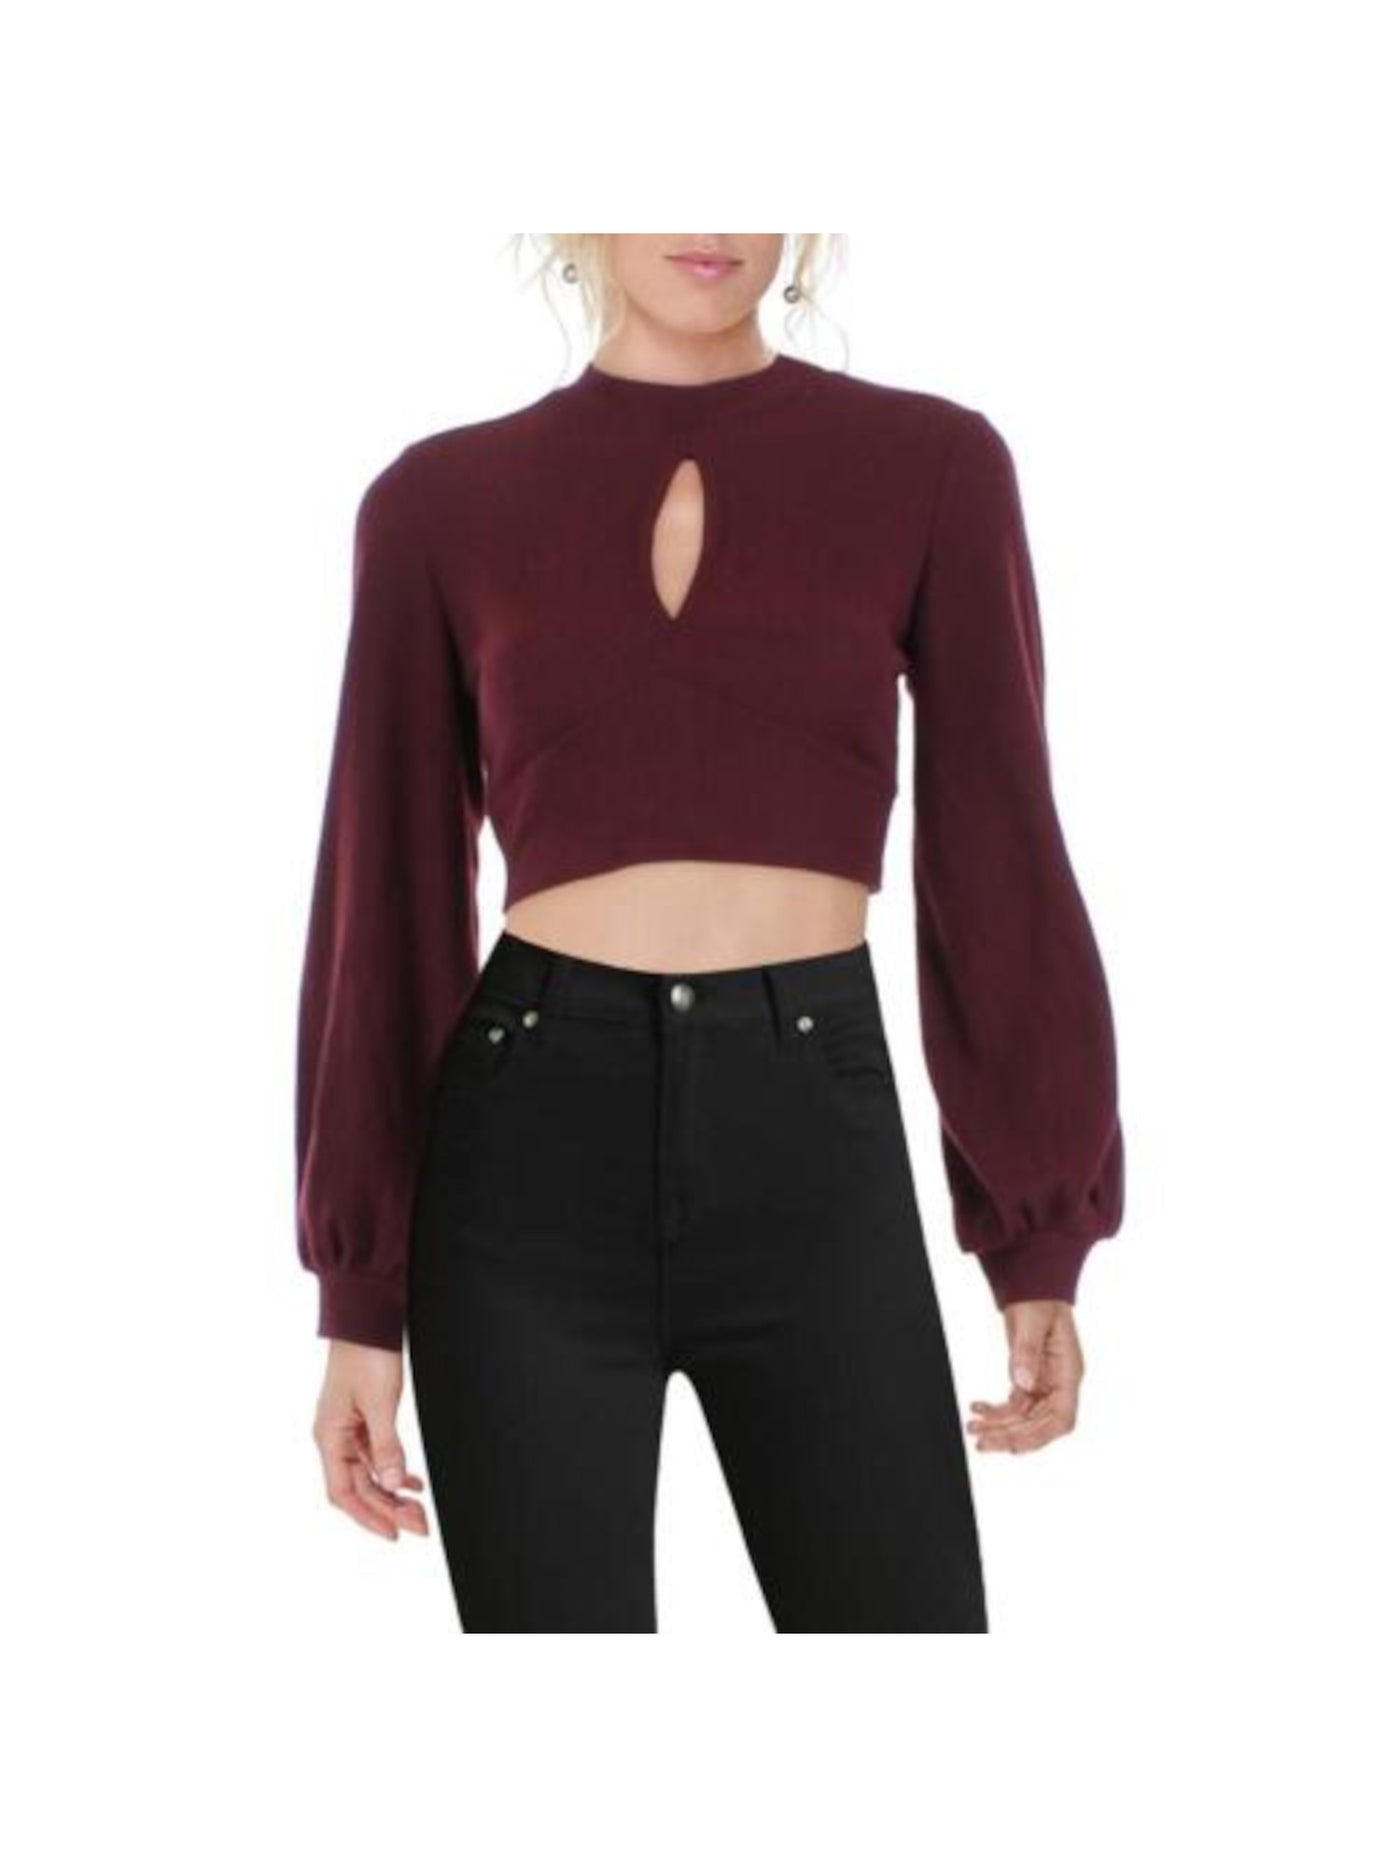 ALMOST FAMOUS Womens Burgundy Cut Out Ribbed Keyhole Tie Back Balloon Sleeve Mock Neck Crop Top Sweater Juniors S